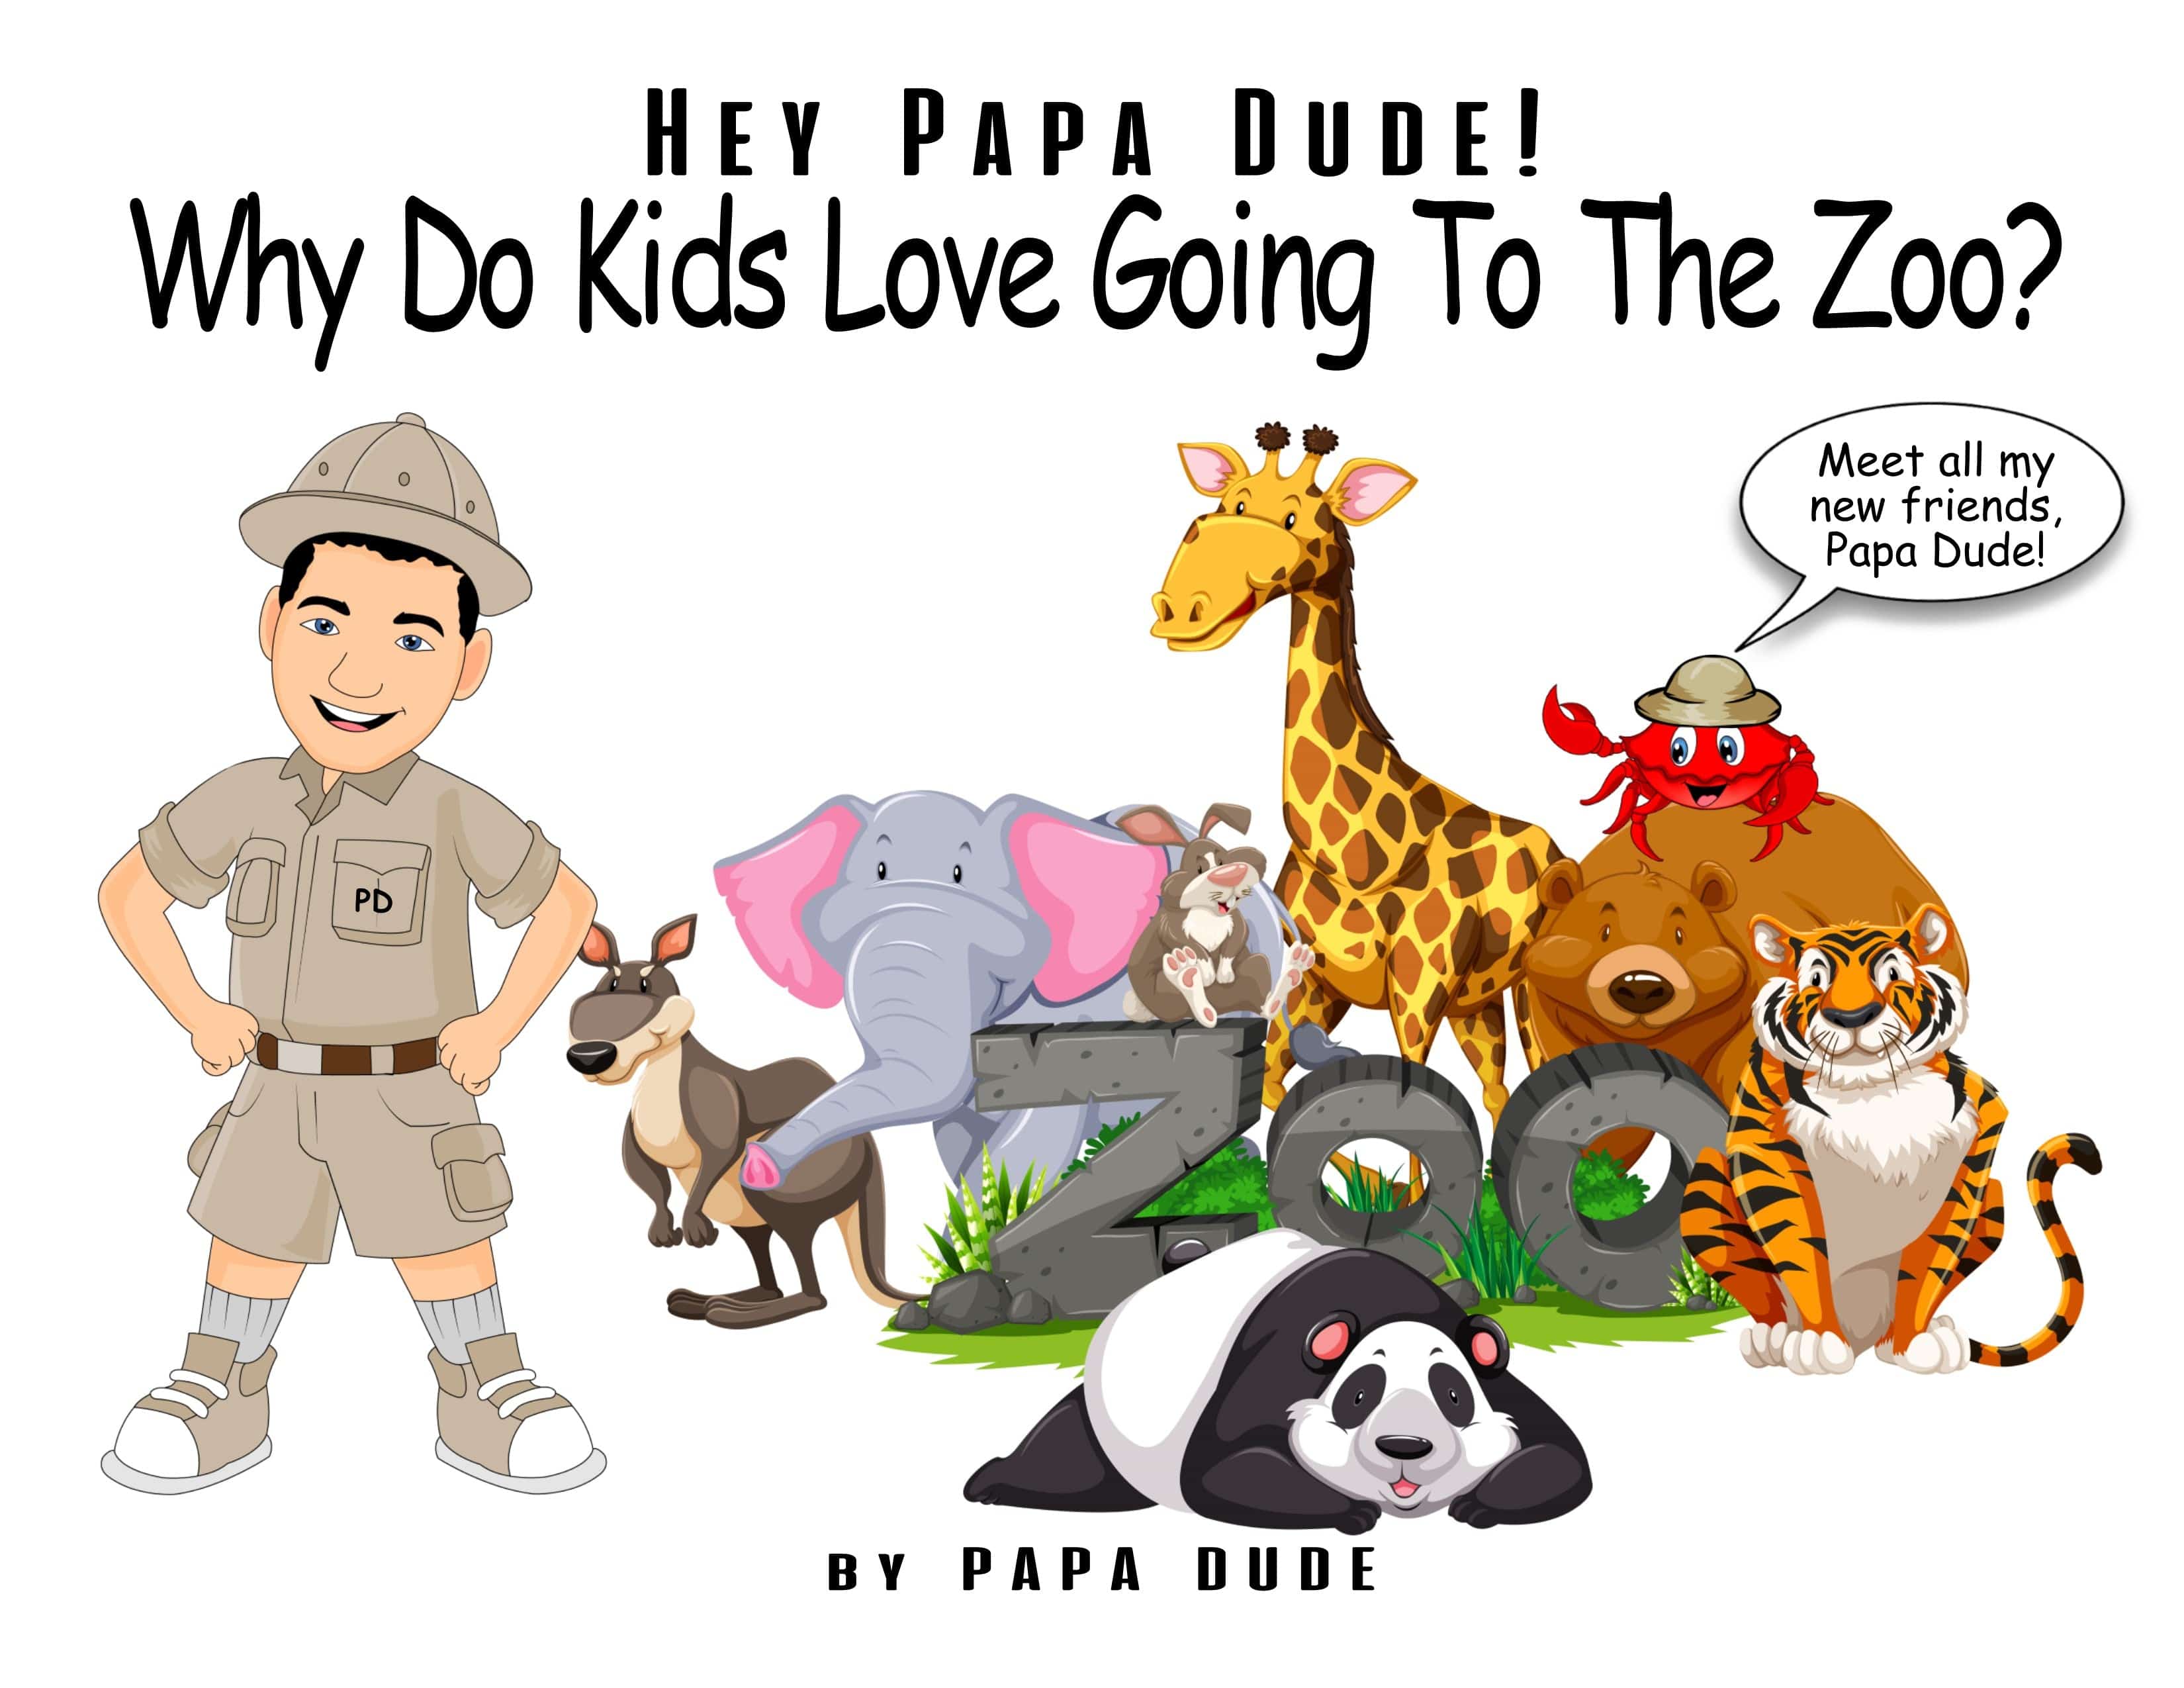 Nia's Just For Kids Inc. Hey Papa Dude! Why Do Kids Love Going to the Zoo? by Steven Scaffidi - Little Miss Muffin Children & Home